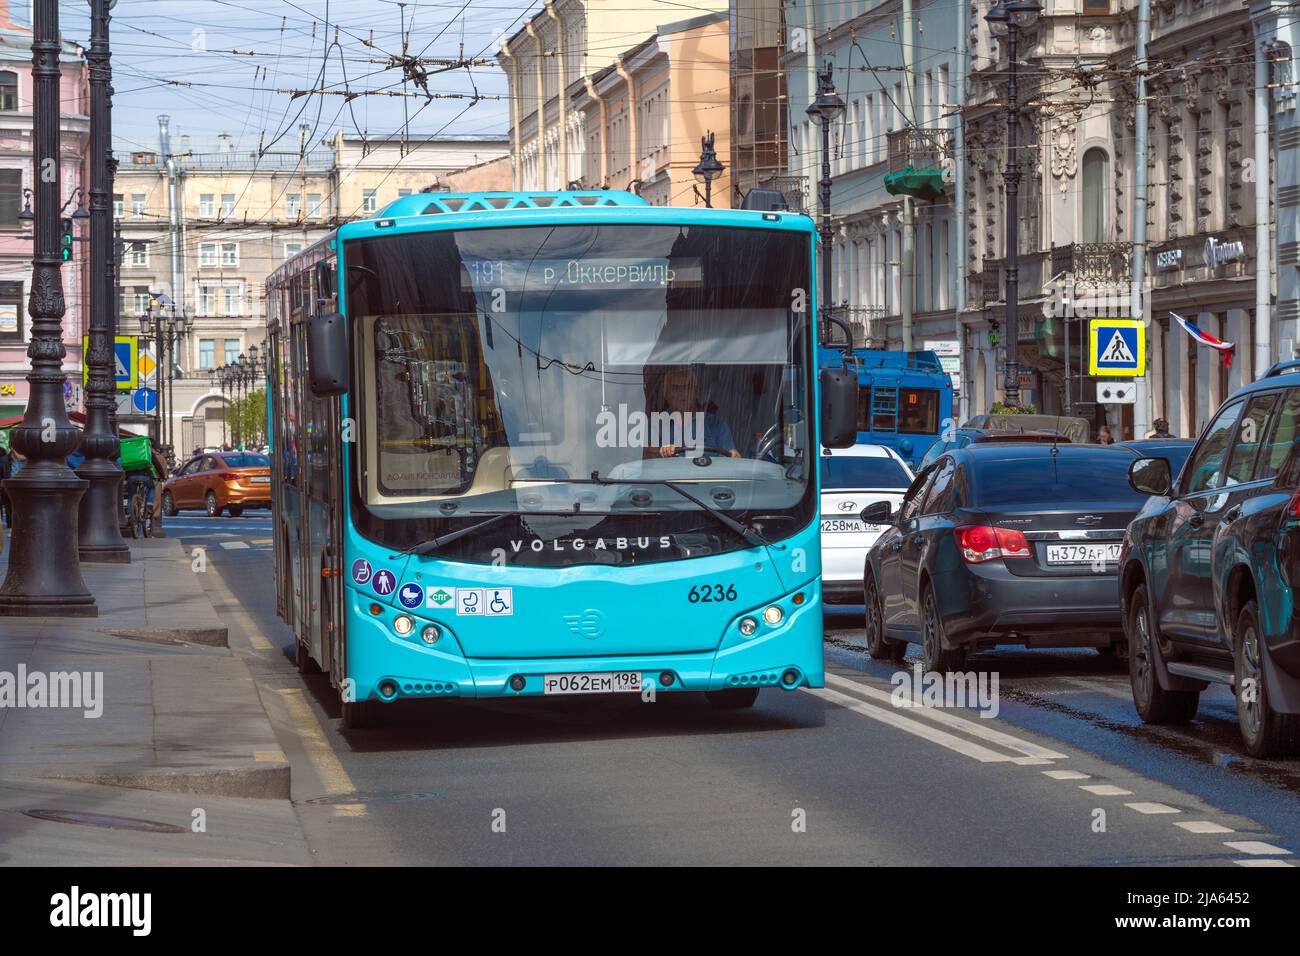 SAINT PETERSBURG, RUSSIA - MAY 23, 2022: City bus of the 'CityRhytm' family (VolgaBus 5270) on the route on a sunny May day Stock Photo